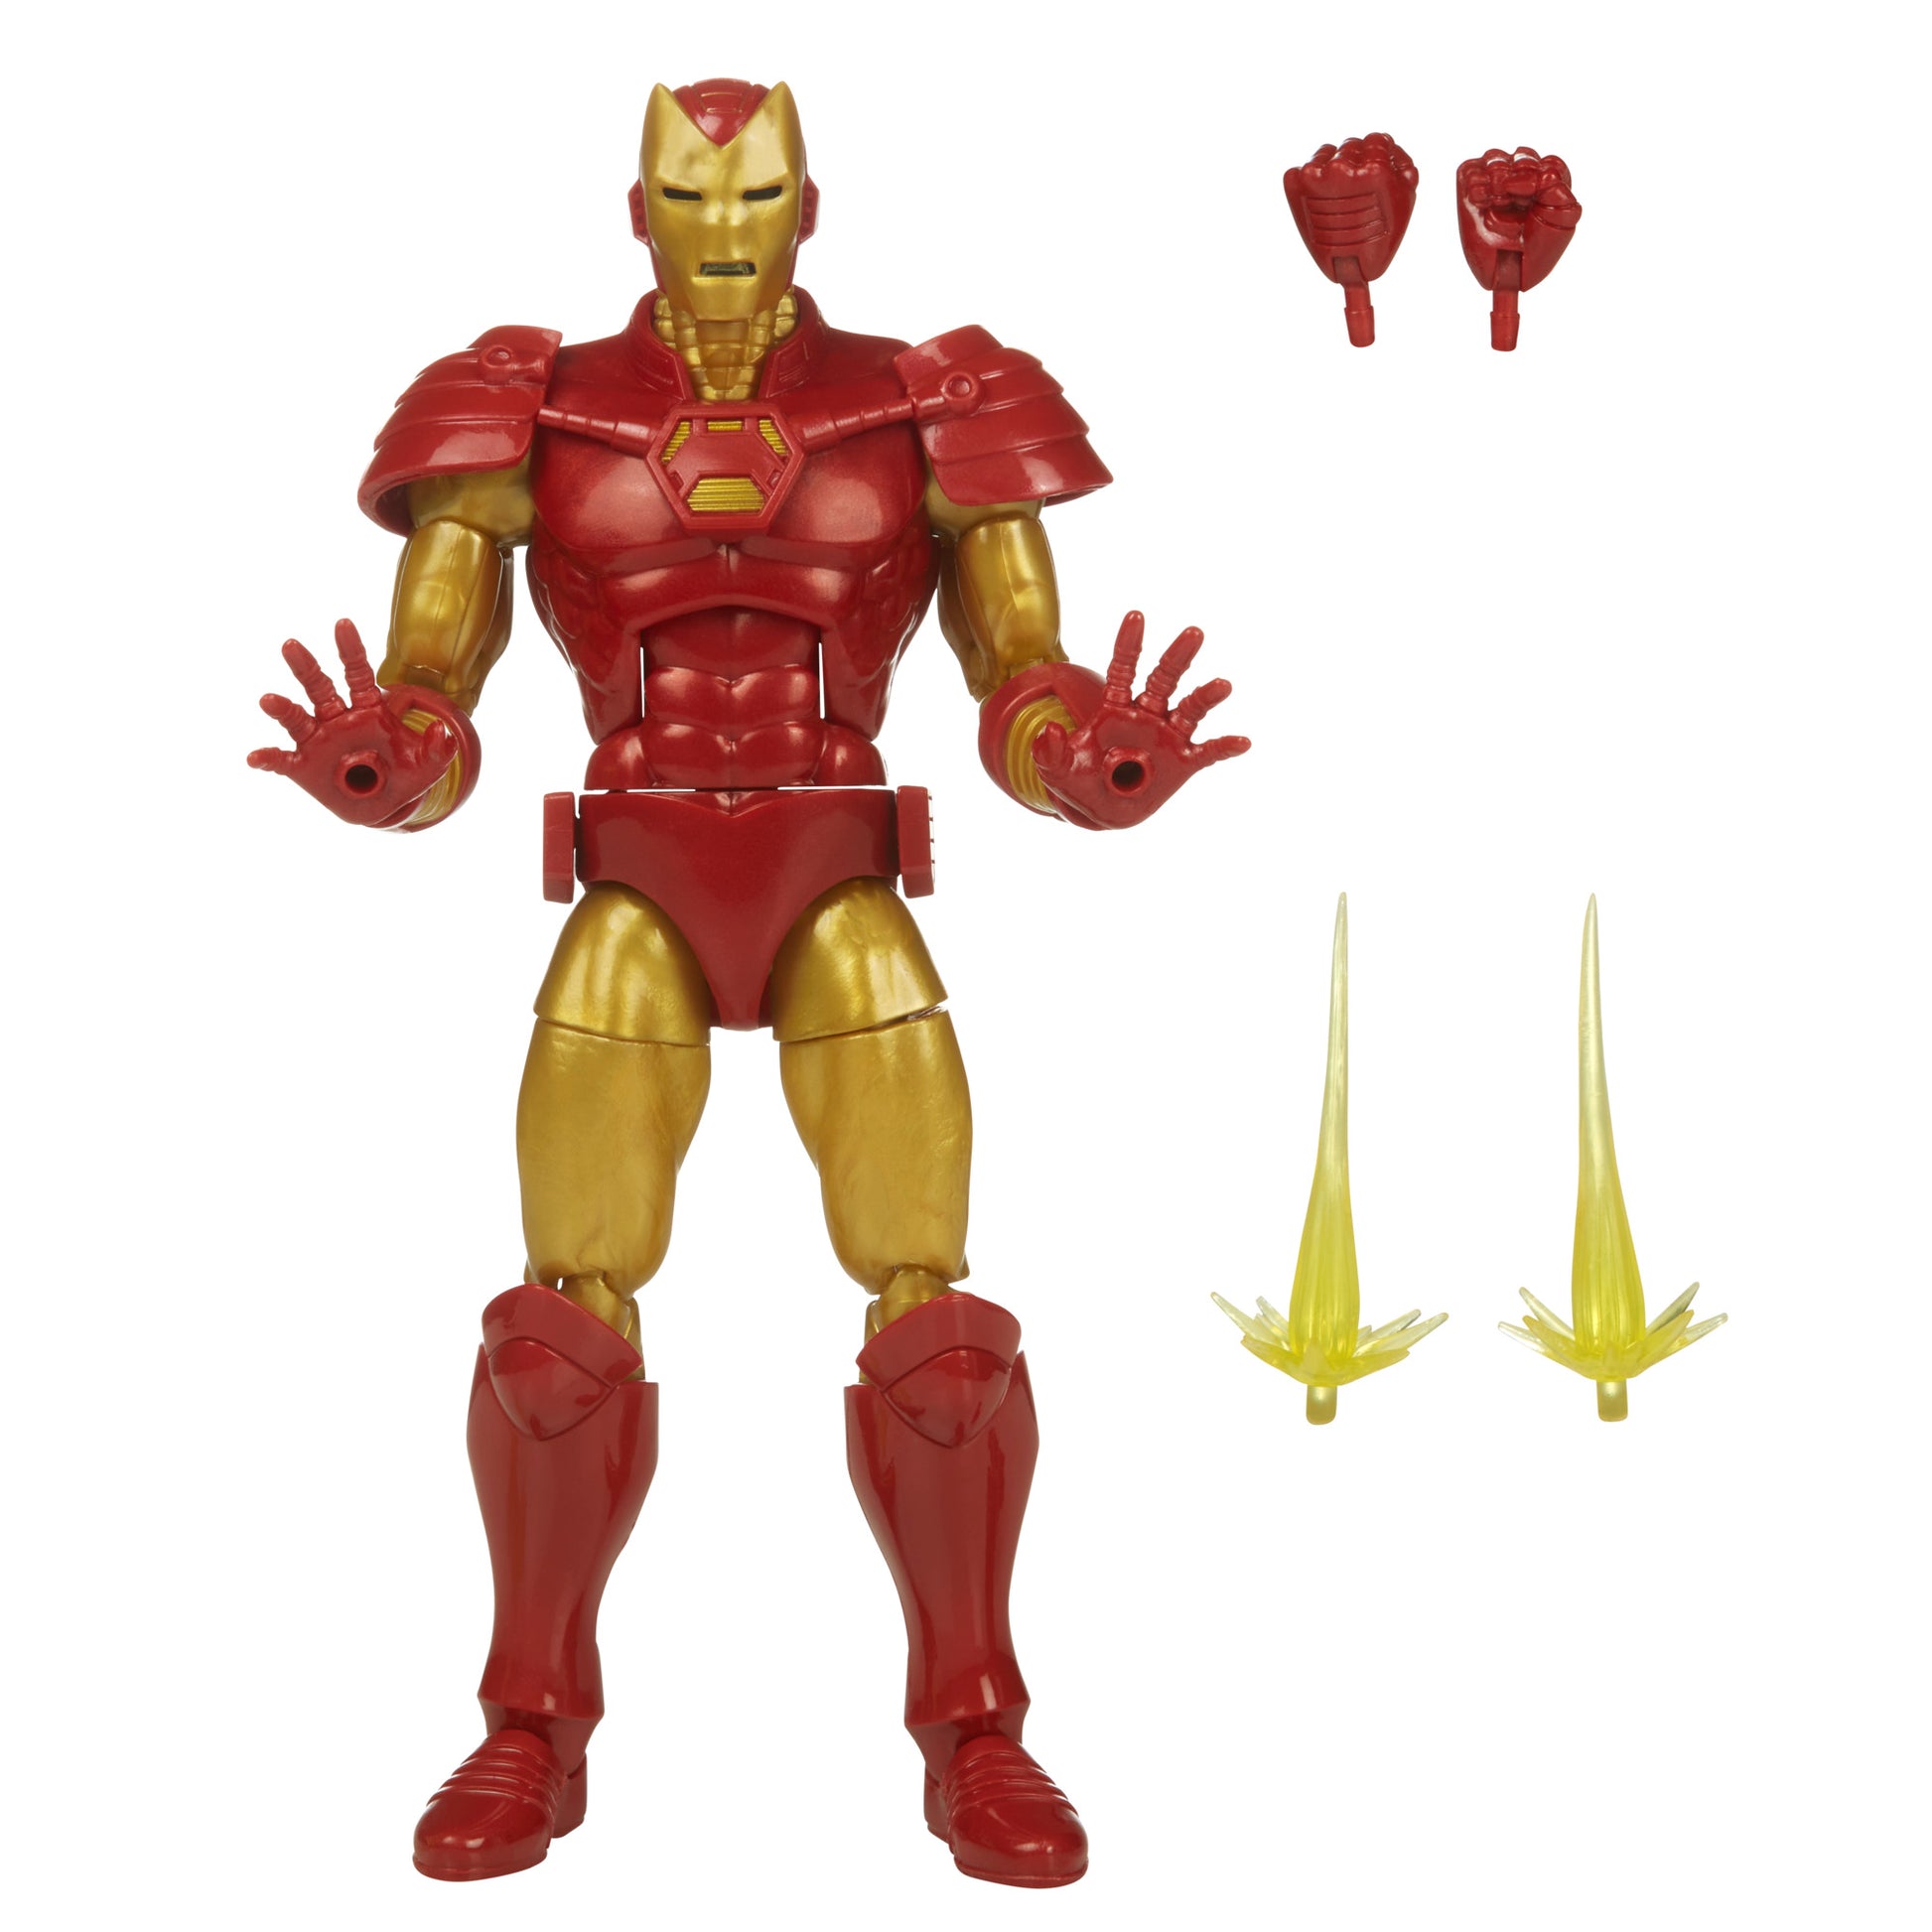 Iron Man with the accessories - Heretoserveyou